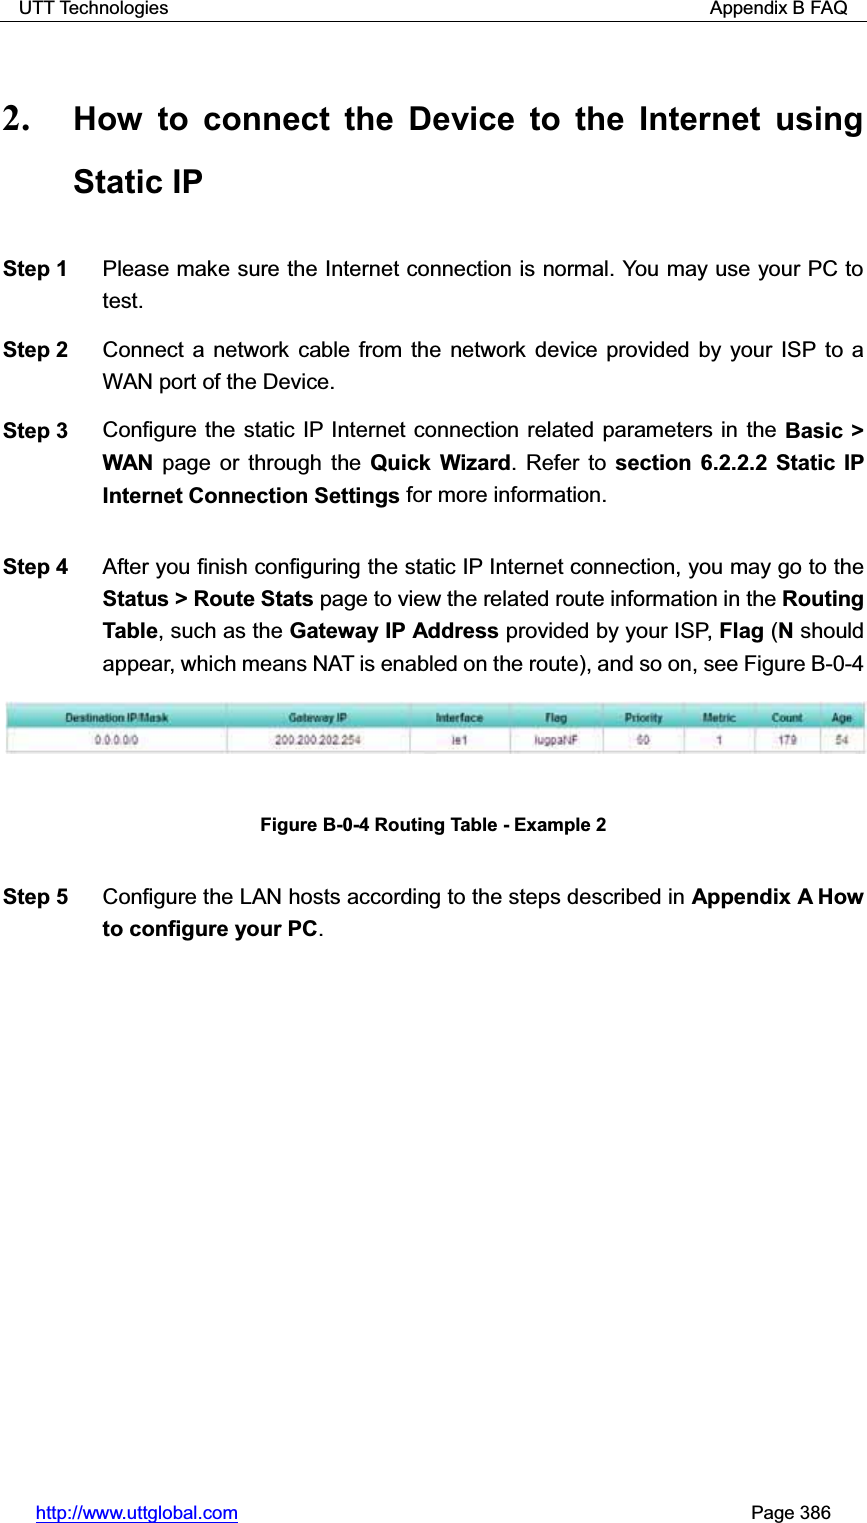 UTT Technologies                                                          Appendix B FAQ http://www.uttglobal.com                                                       Page 386 2. How to connect the Device to the Internet using Static IP Step 1  Please make sure the Internet connection is normal. You may use your PC to test. Step 2  Connect a network cable from the network device provided by your ISP to a WAN port of the Device. Step 3  Configure the static IP Internet connection related parameters in the Basic &gt; WAN  page or through the Quick Wizard. Refer to section 6.2.2.2 Static IP Internet Connection Settings for more information. Step 4  After you finish configuring the static IP Internet connection, you may go to theStatus &gt; Route Stats page to view the related route information in the Routing Table, such as the Gateway IP Address provided by your ISP, Flag (N should appear, which means NAT is enabled on the route), and so on, see Figure B-0-4 Figure B-0-4 Routing Table - Example 2 Step 5  Configure the LAN hosts according to the steps described in Appendix A How to configure your PC.